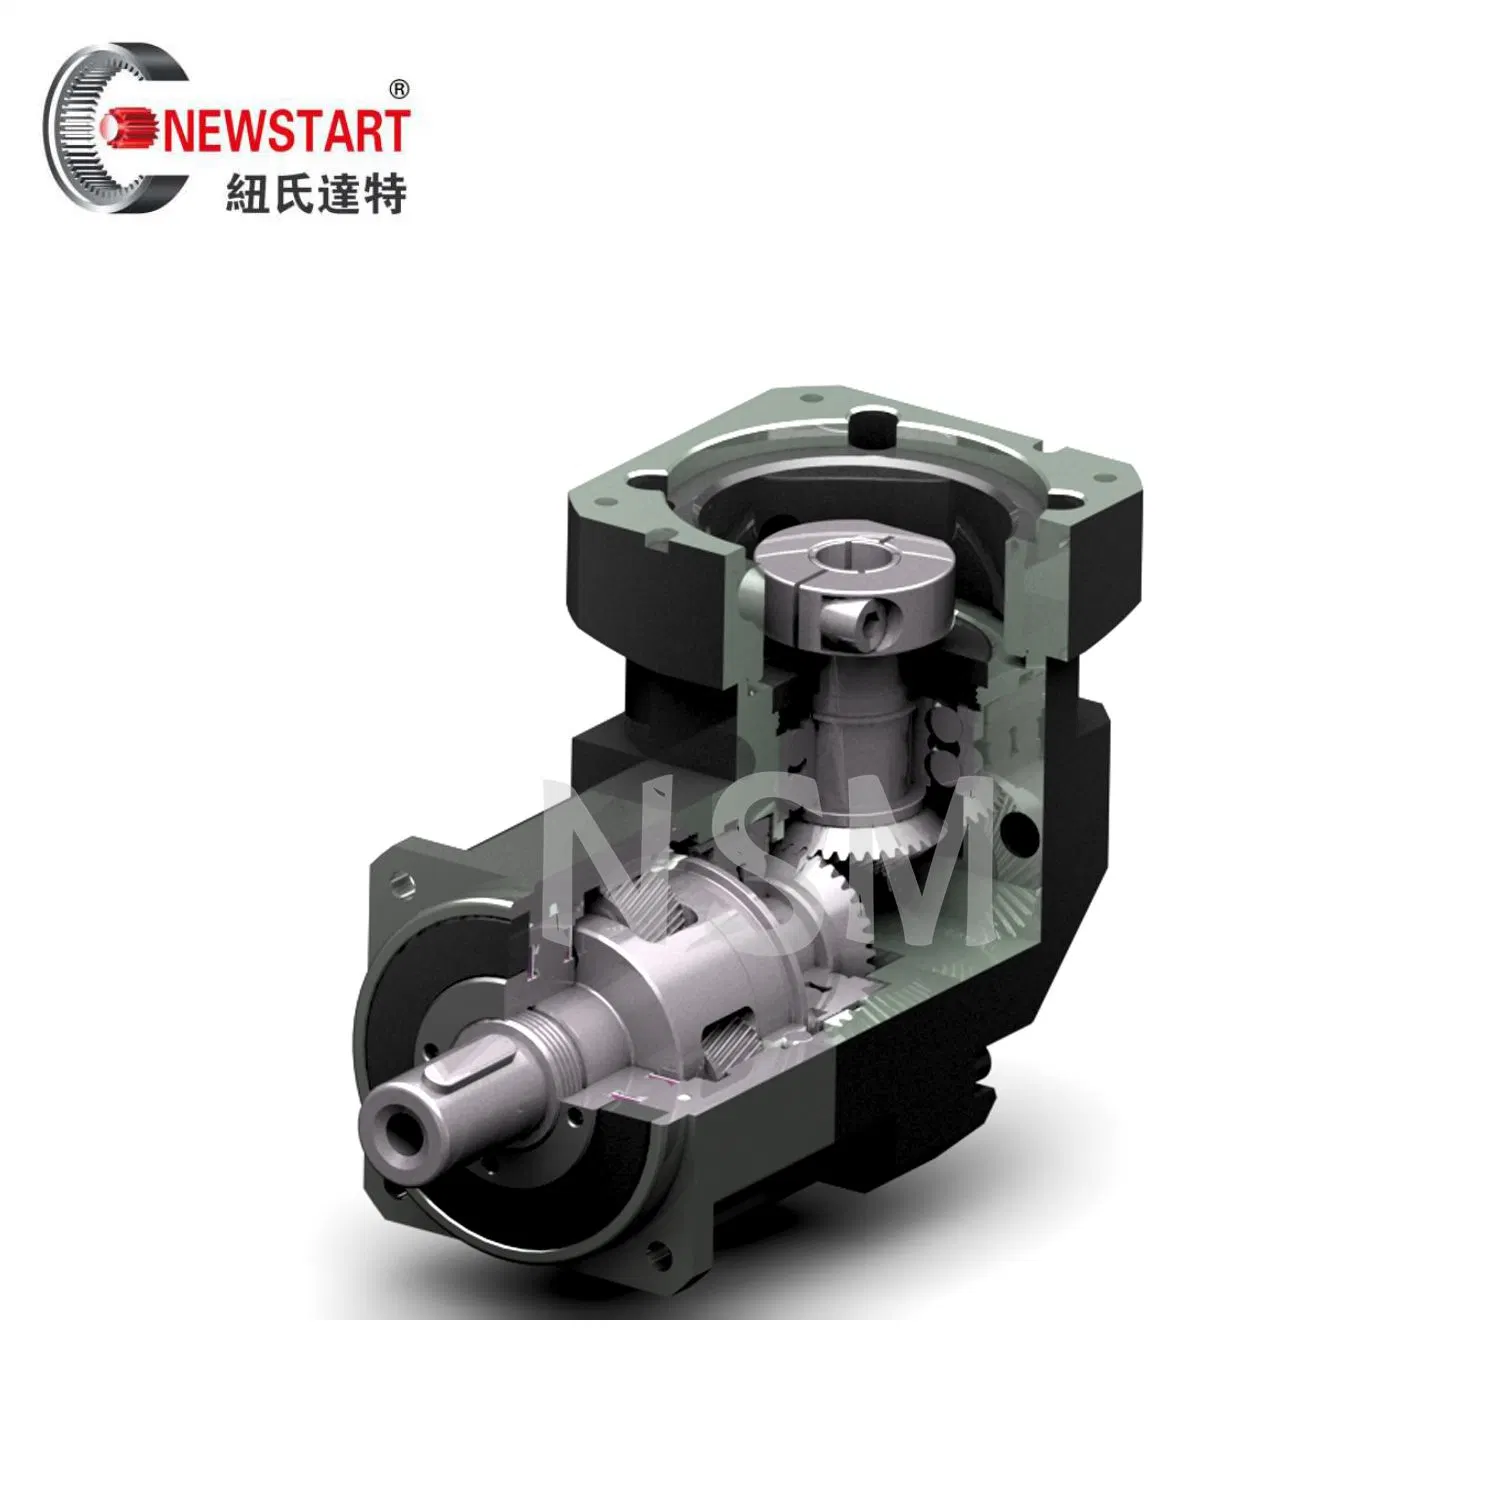 Newstart Abr060 2stage Transmission Precison Planetary Reducer Gearbox for Rexroth Motor, 0.4kw